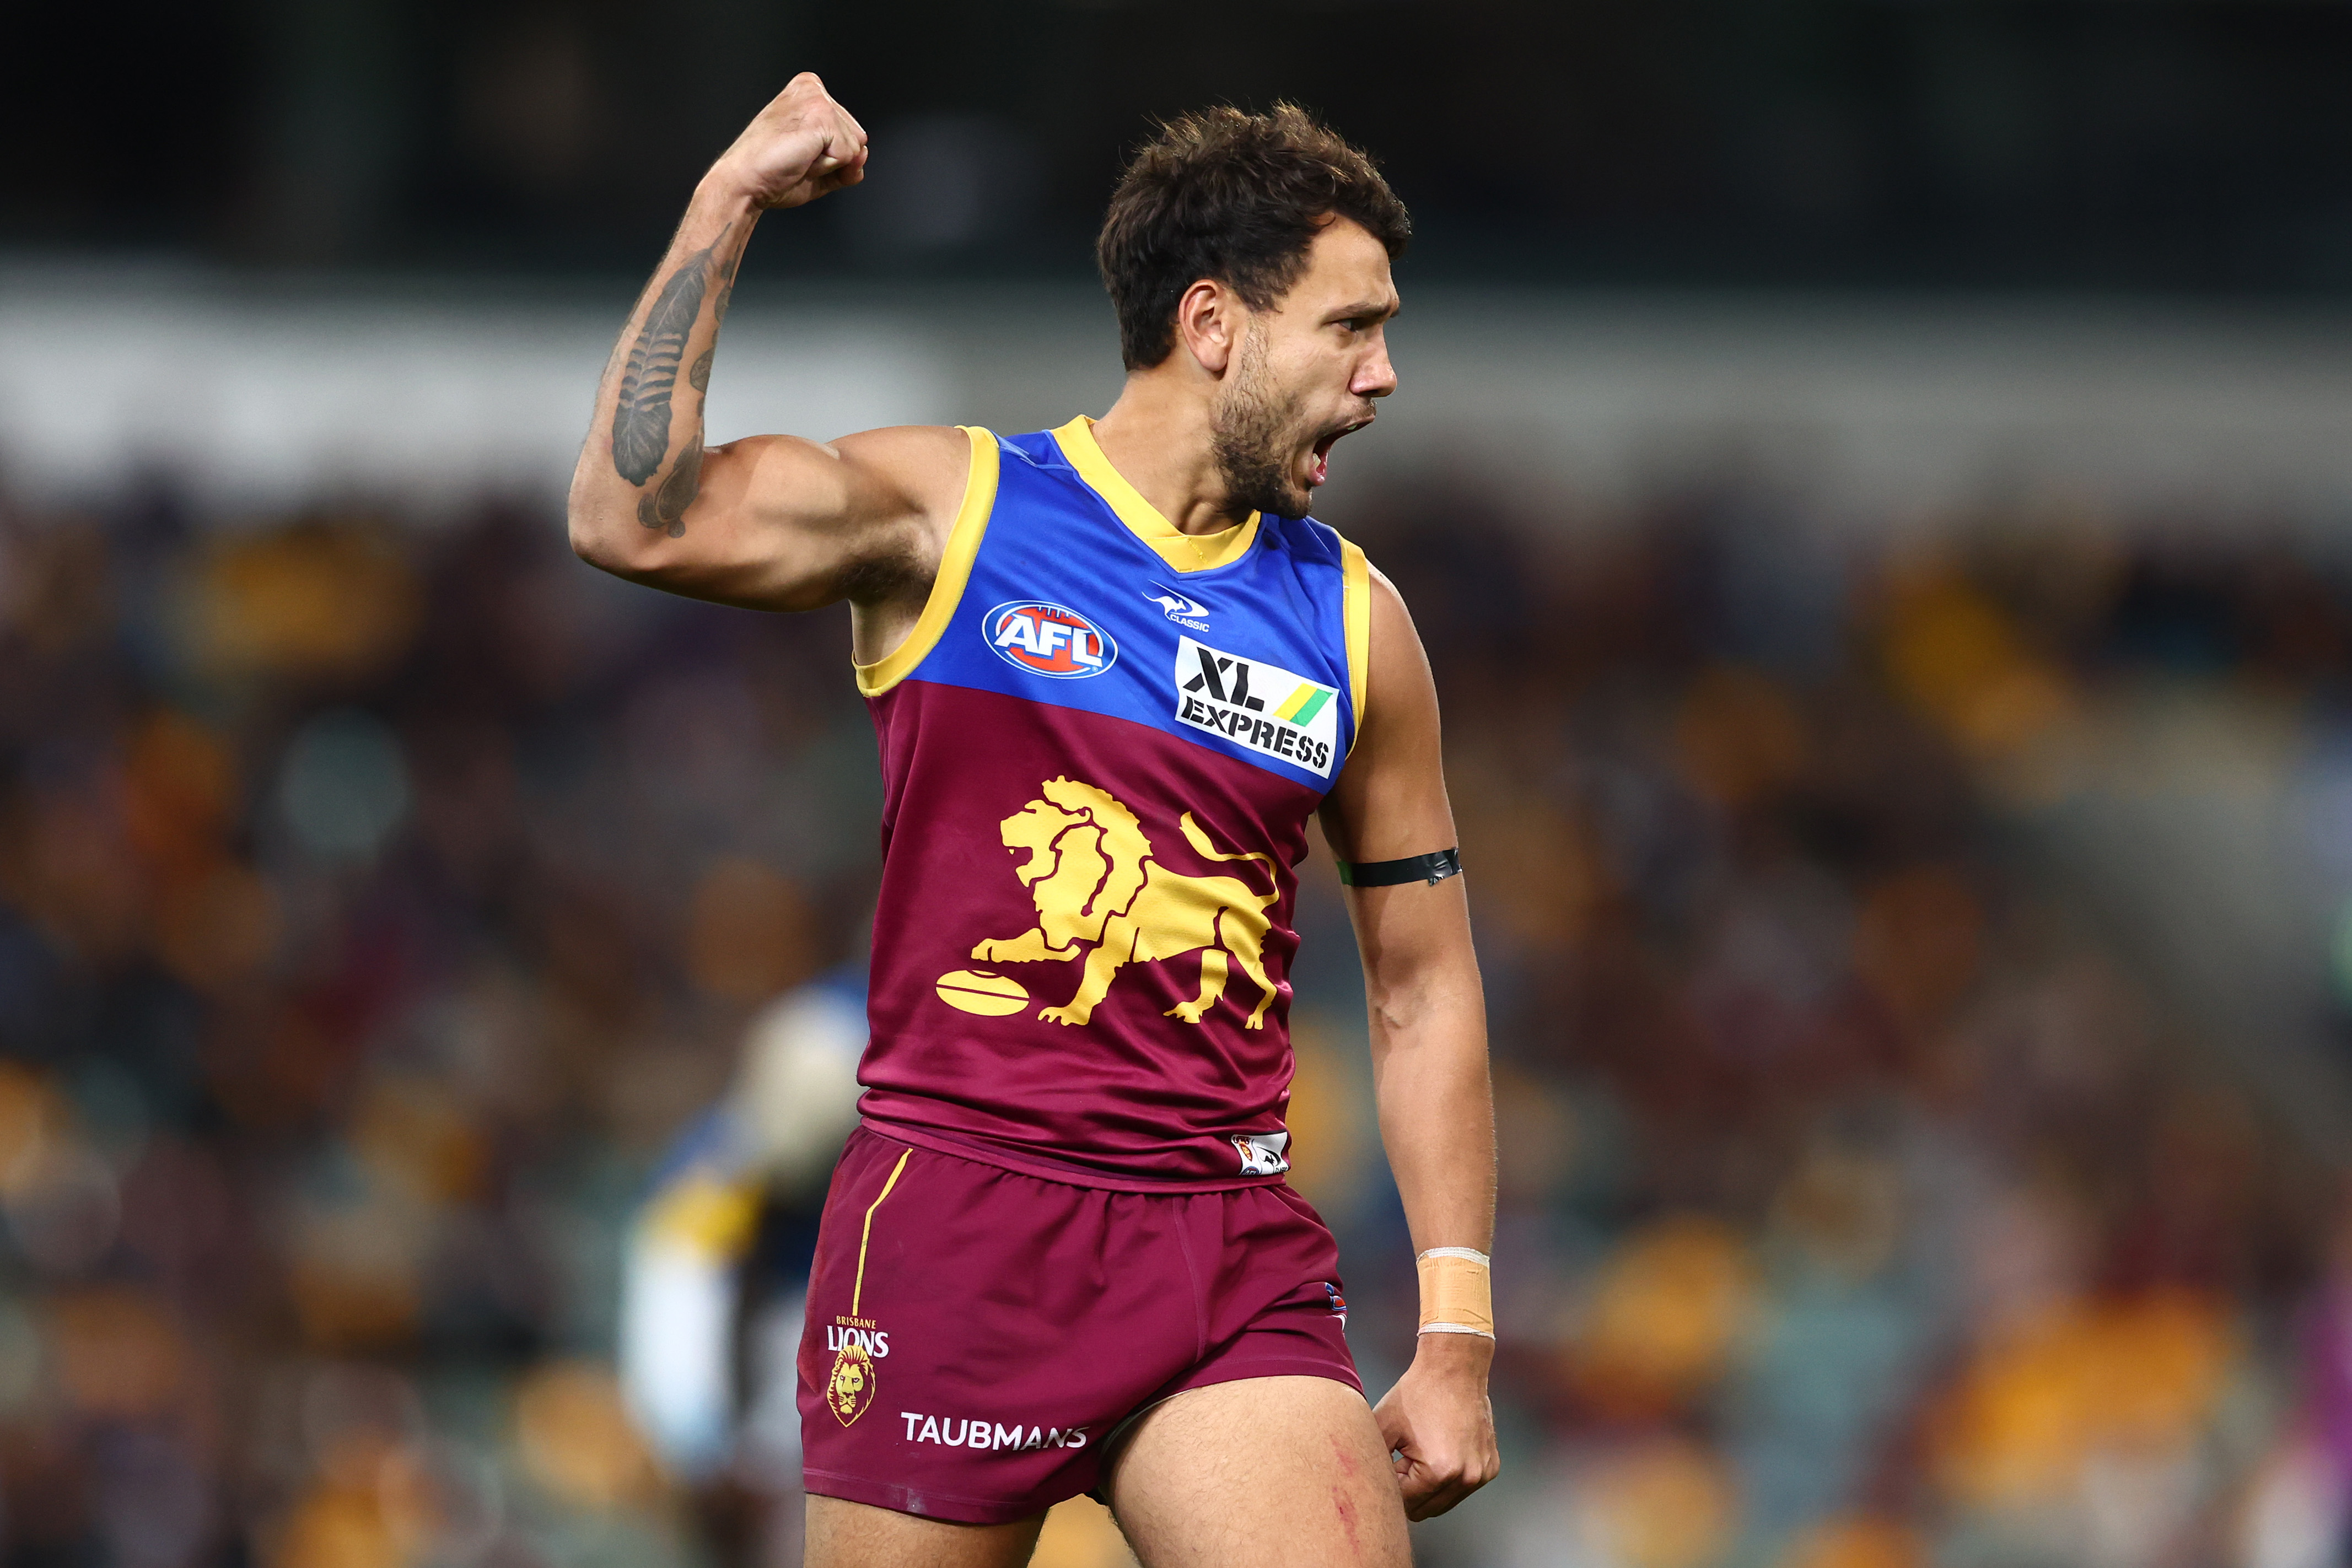 AFL News 2022 | Callum Ah Chee speaks out against racist online abuse and Brisbane Lions complaint